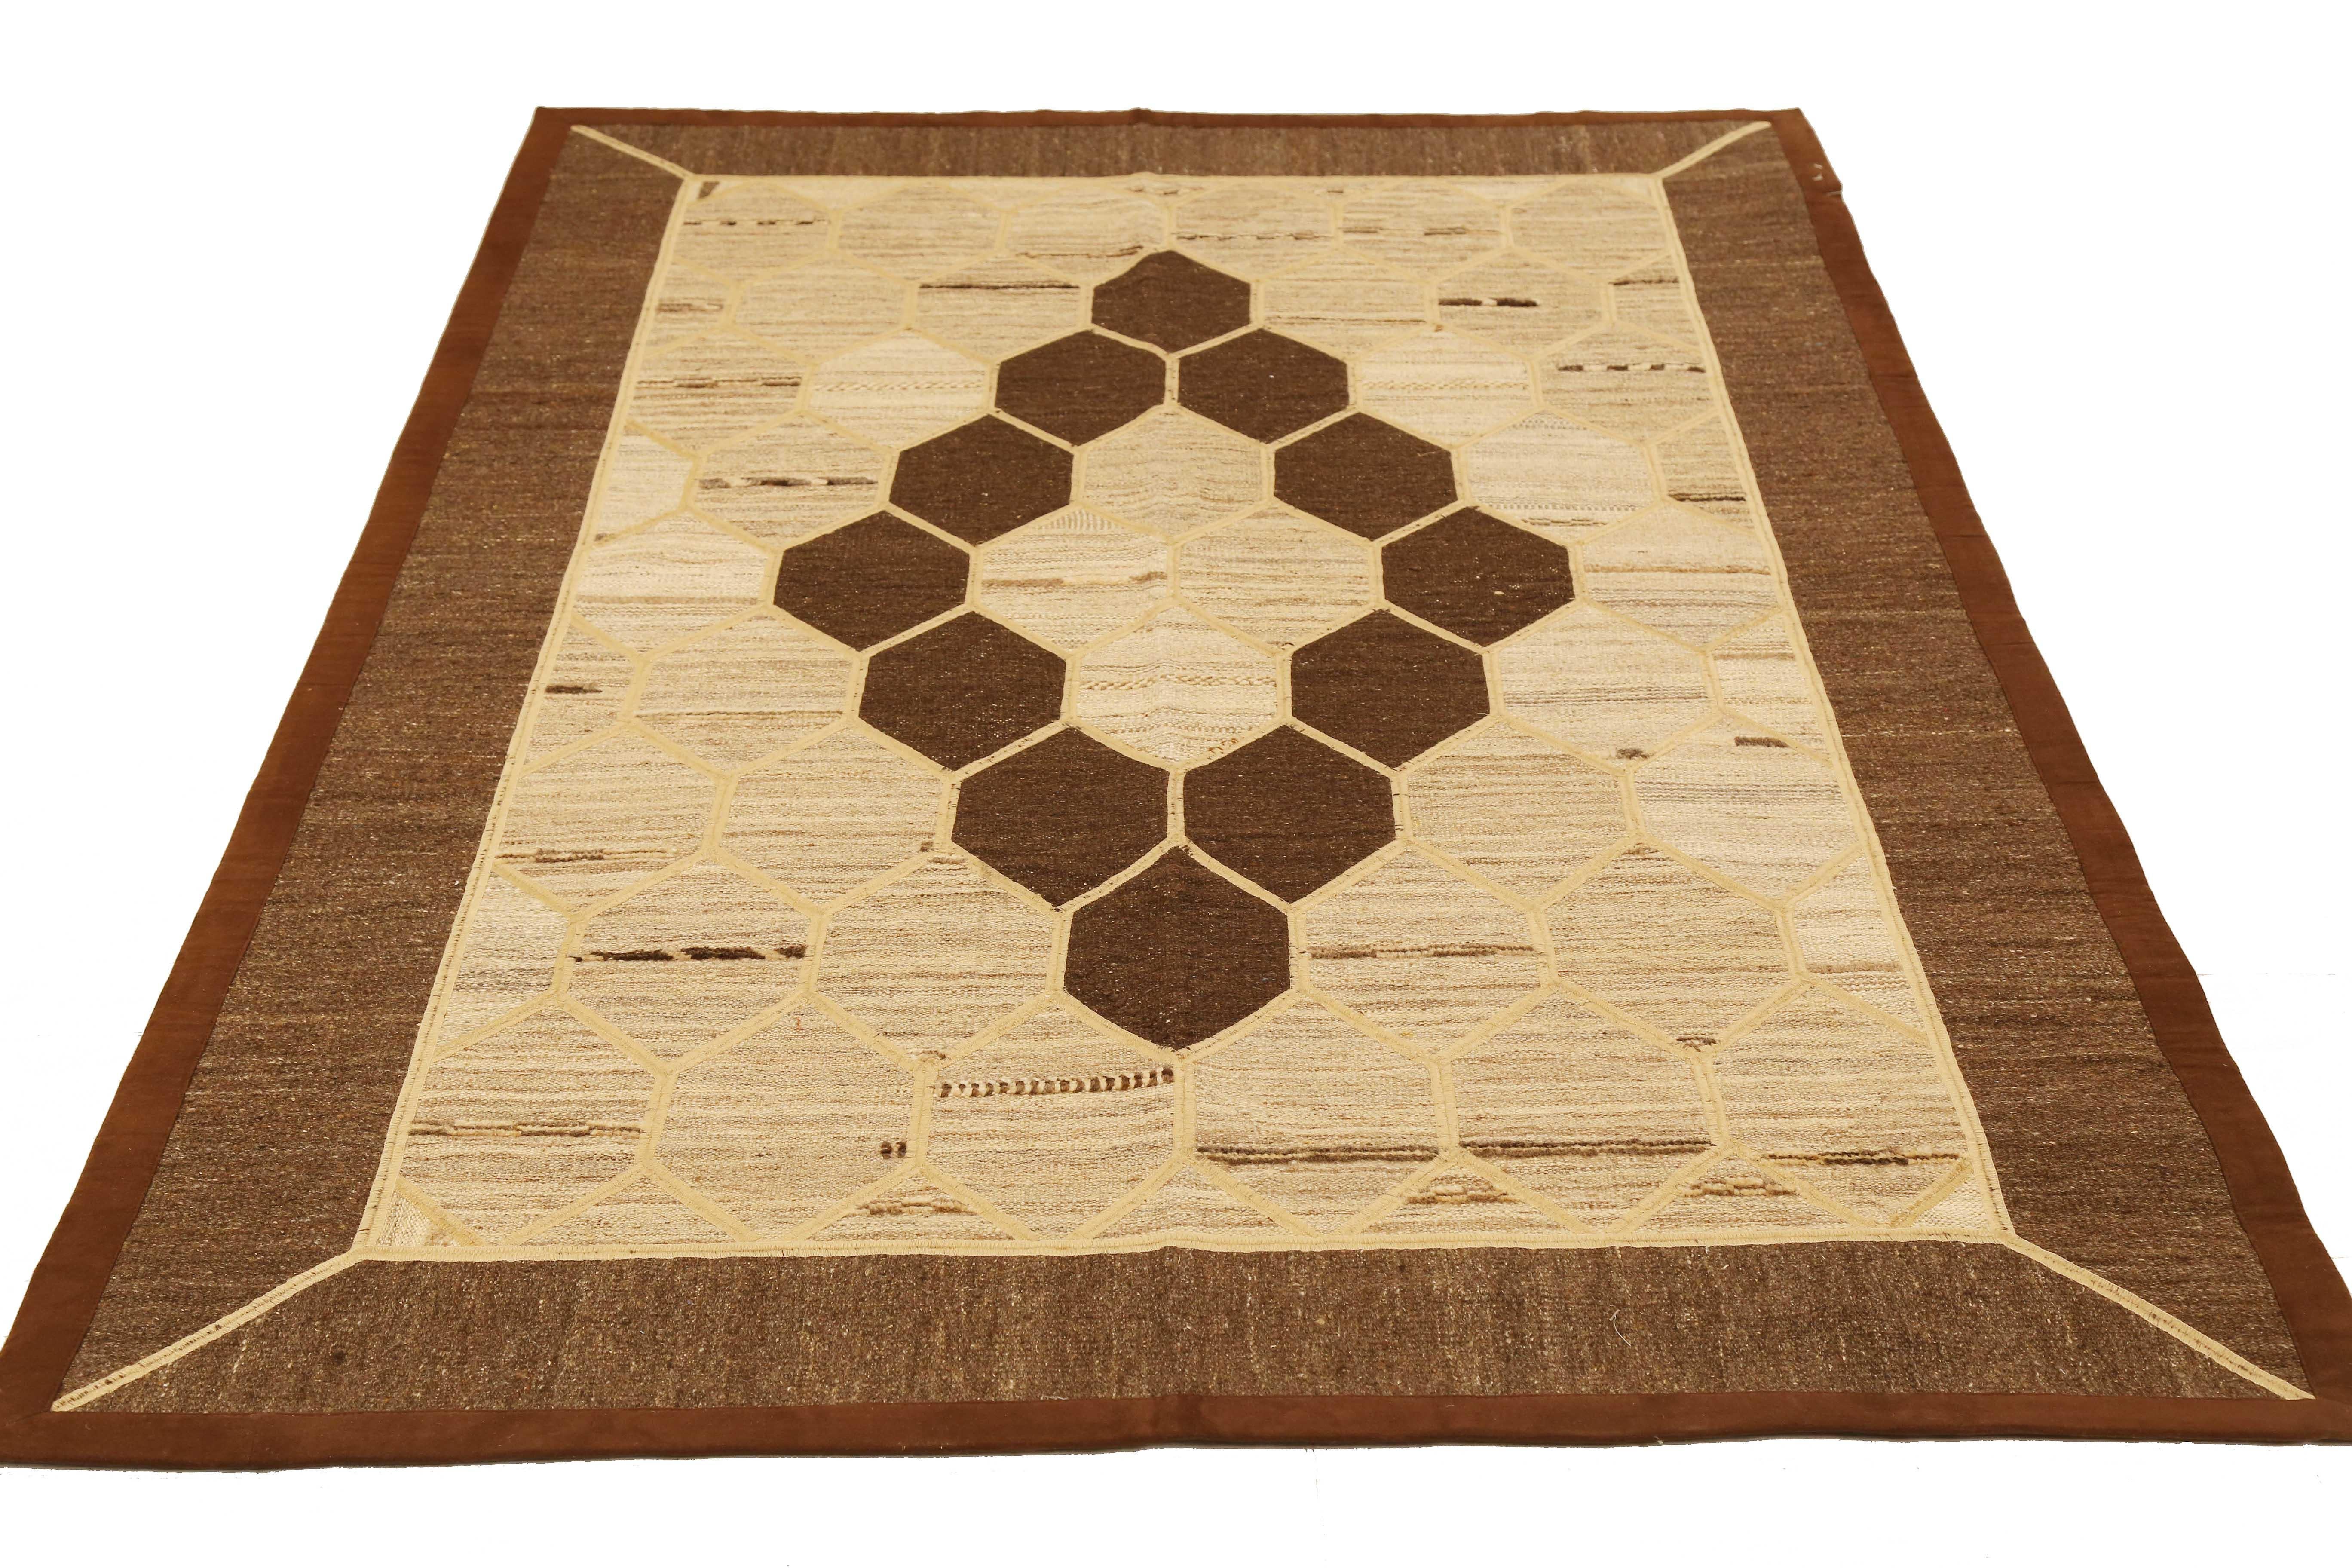 Modern Turkish rug handwoven from the finest sheep’s wool and colored with all-natural vegetable dyes that are safe for humans and pets. It’s a traditional Patch Kilim flat-weave design featuring brown and ivory beehive pattern. It’s a stunning